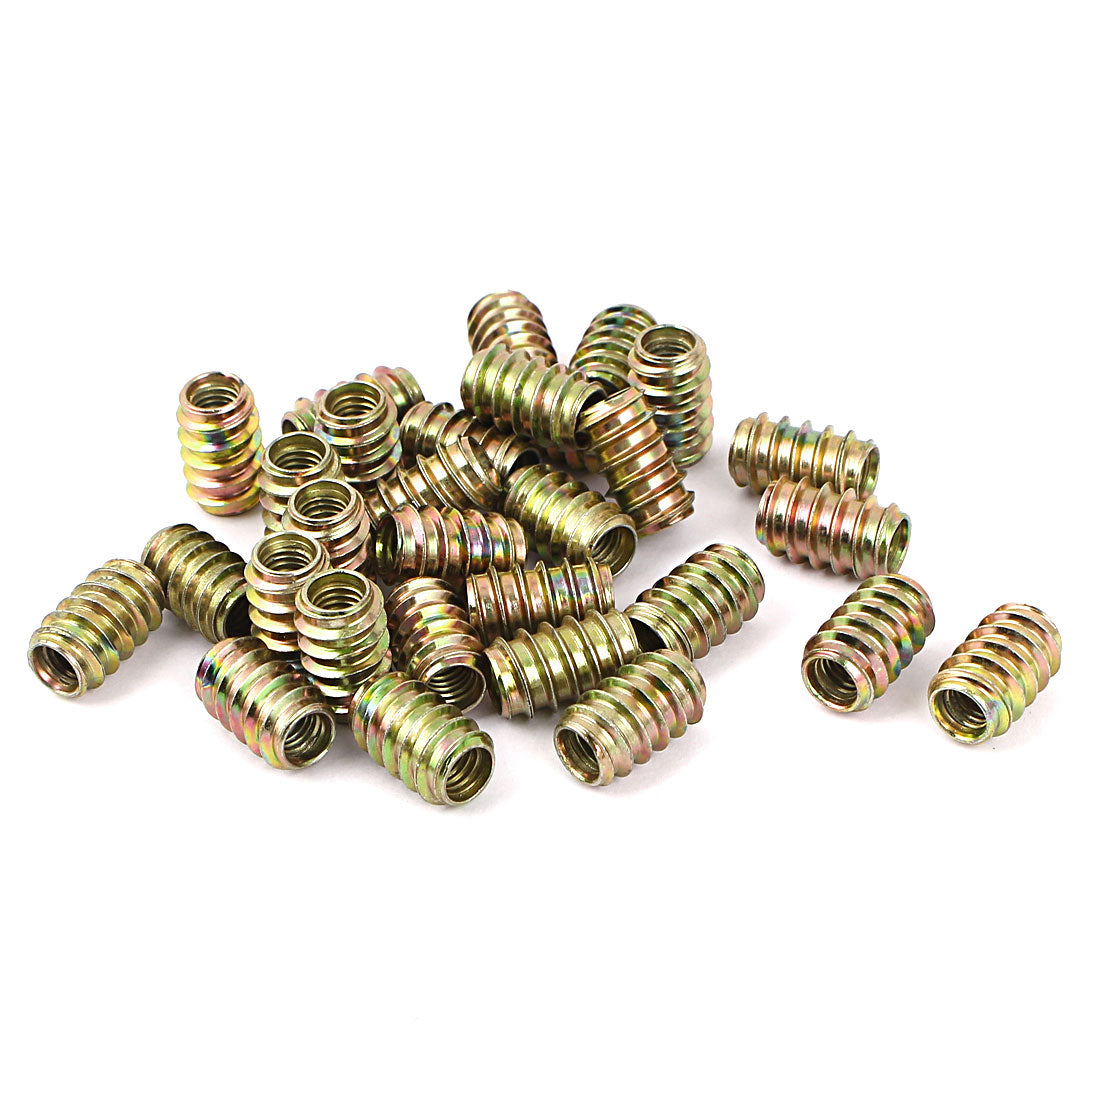 uxcell Uxcell M6 x 17mm Unhead Type E-Nut Wood Furniture Insert Nuts 30 Pcs